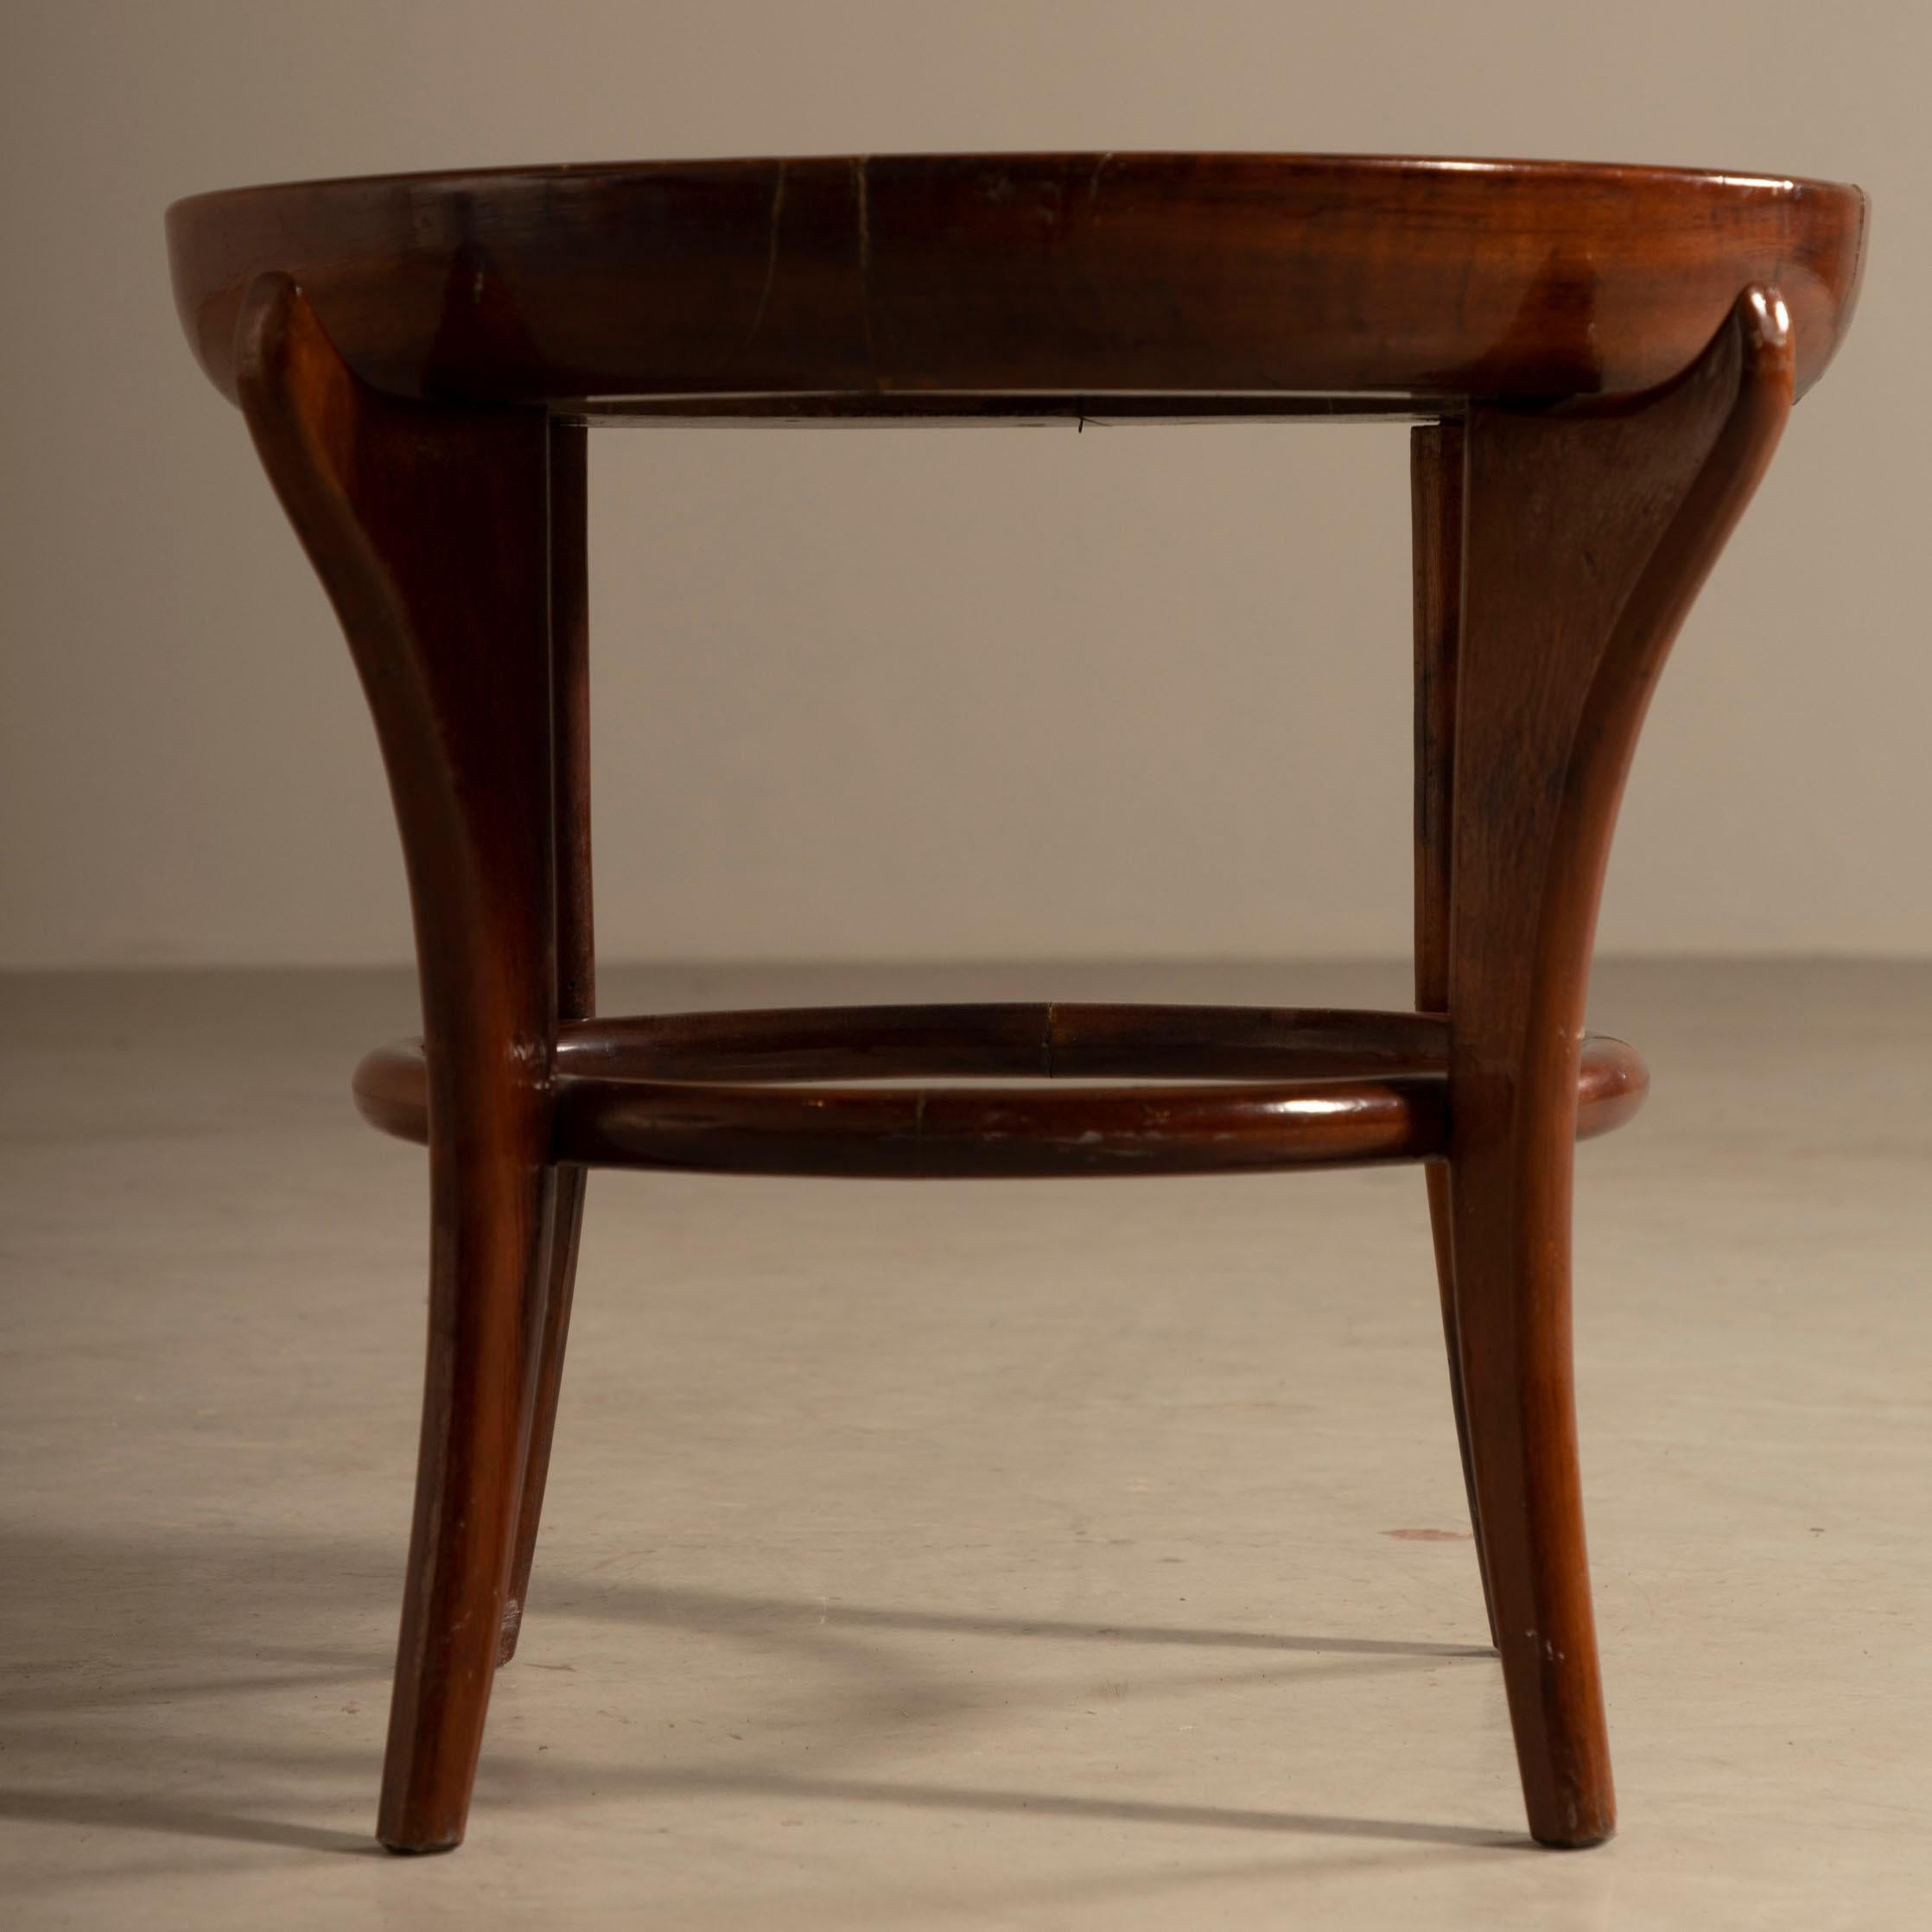 'Maracanã' Side Tables, by Giuseppe Scapinelli, Brazilian Mid-Century Modern In Good Condition For Sale In Sao Paulo, SP